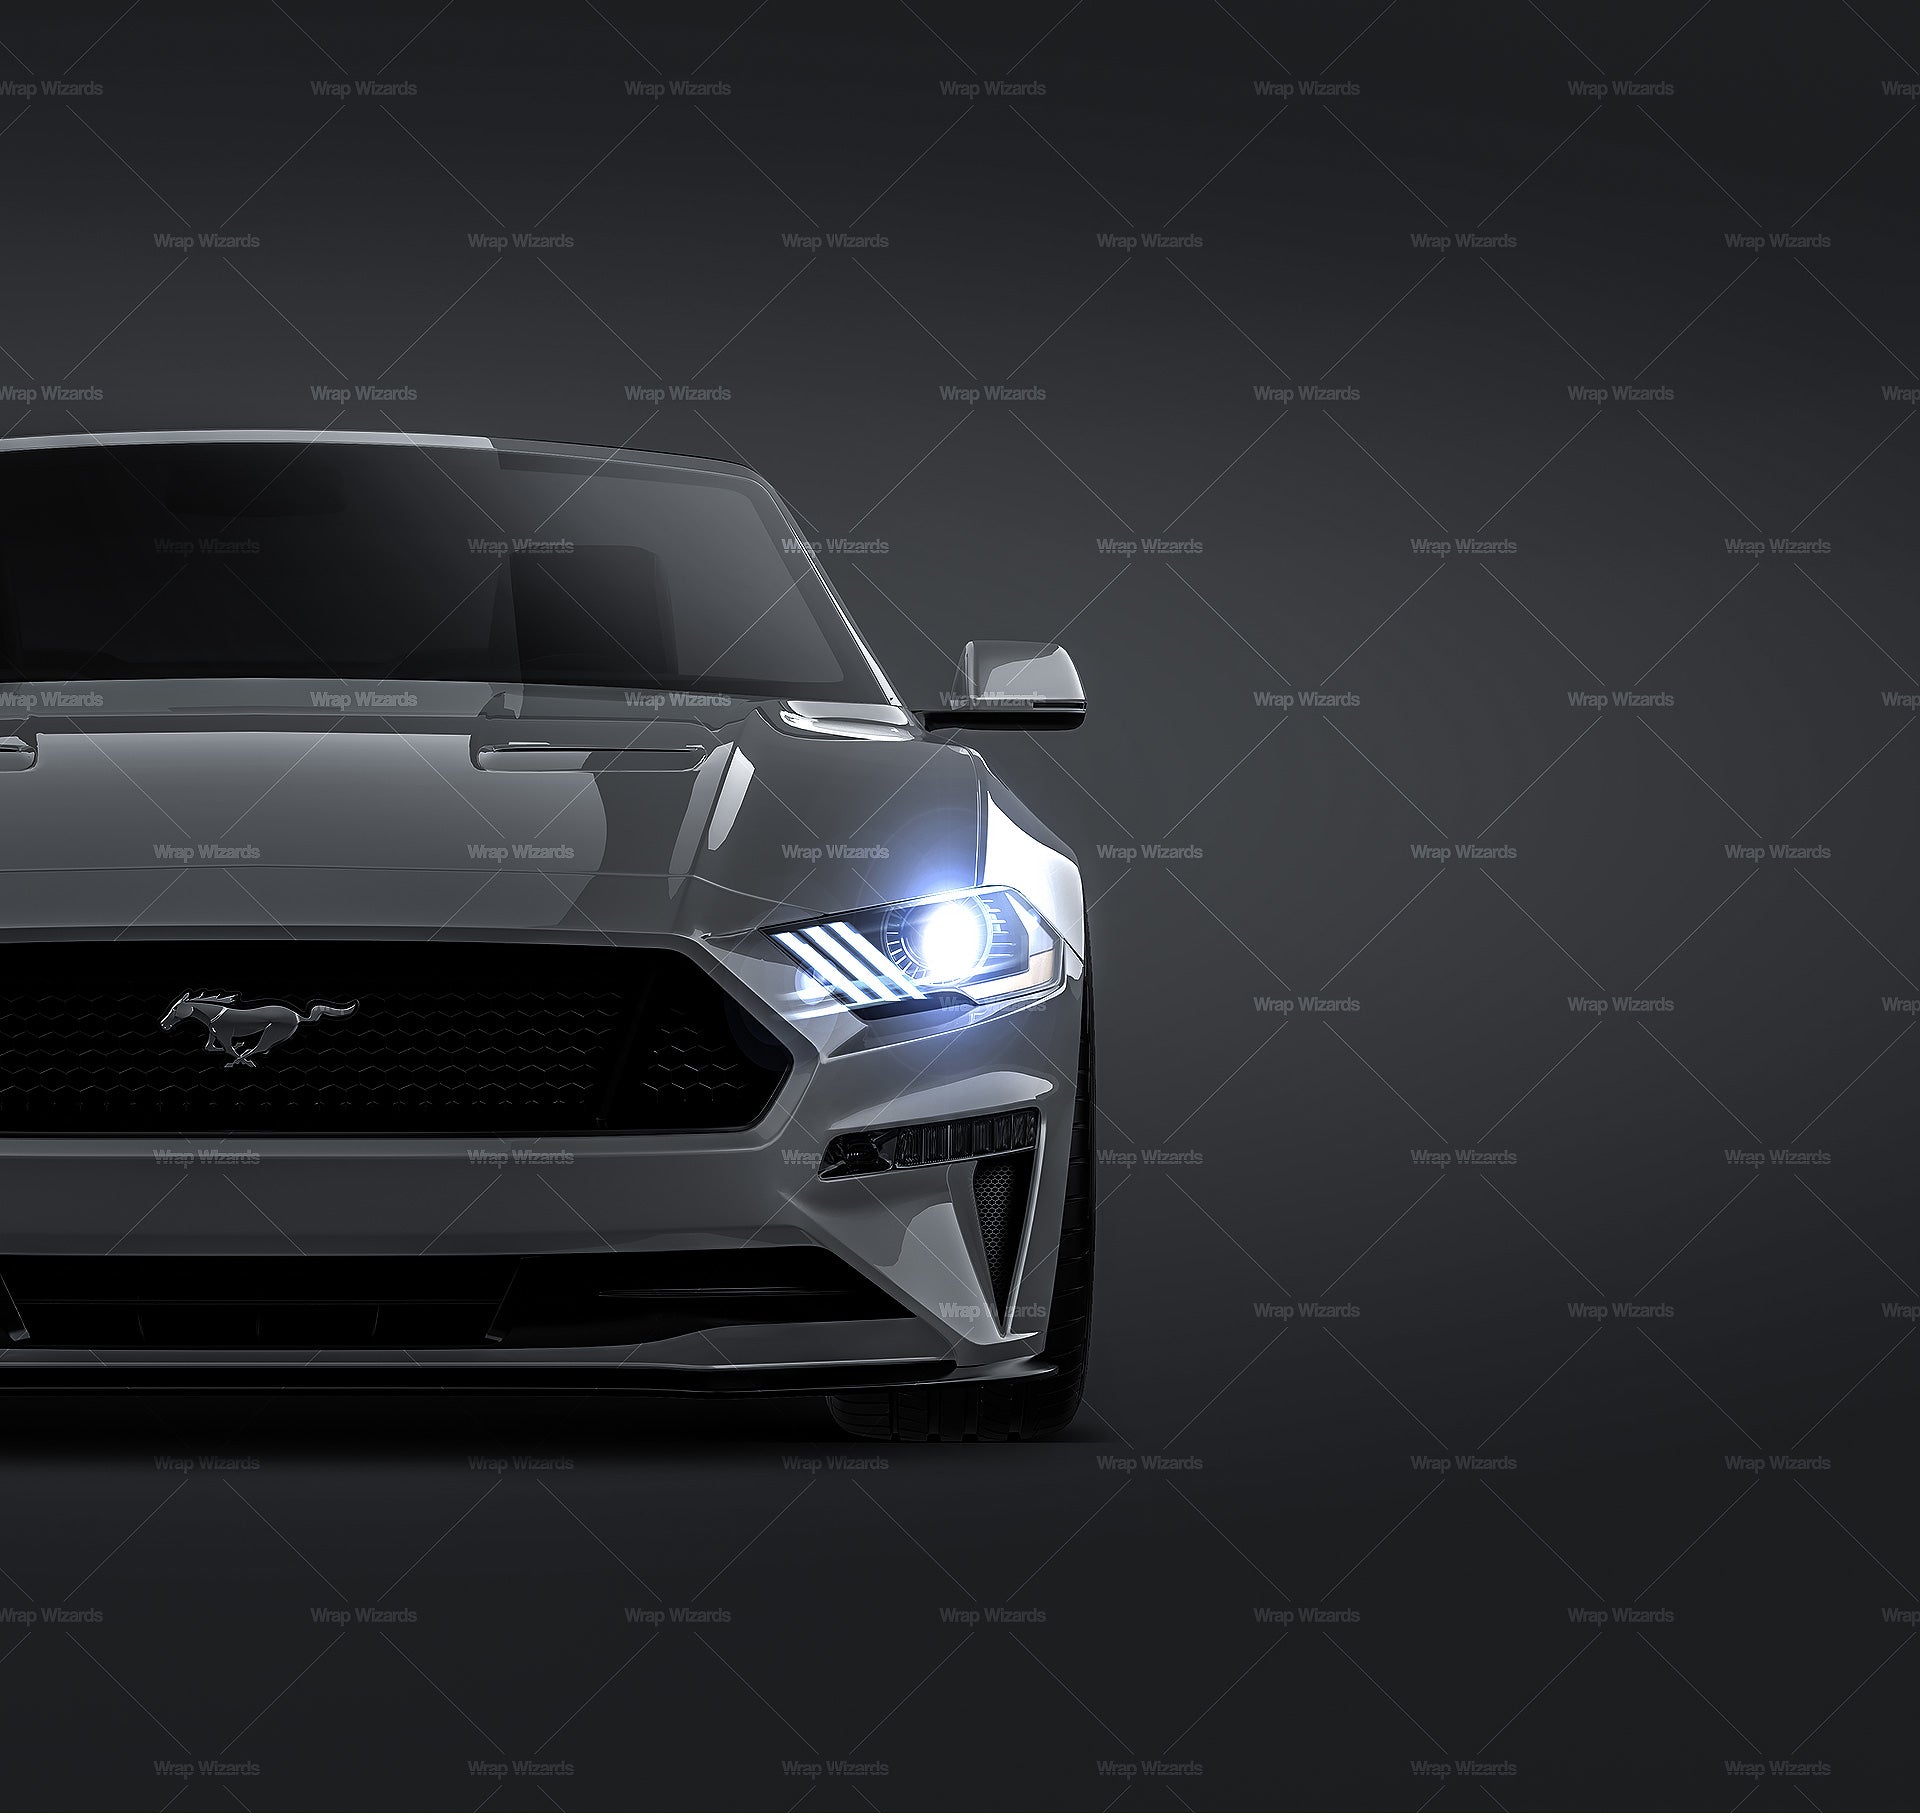 Ford Mustang GT 2018 Convertible glossy finish - all sides Car Mockup Template.psd